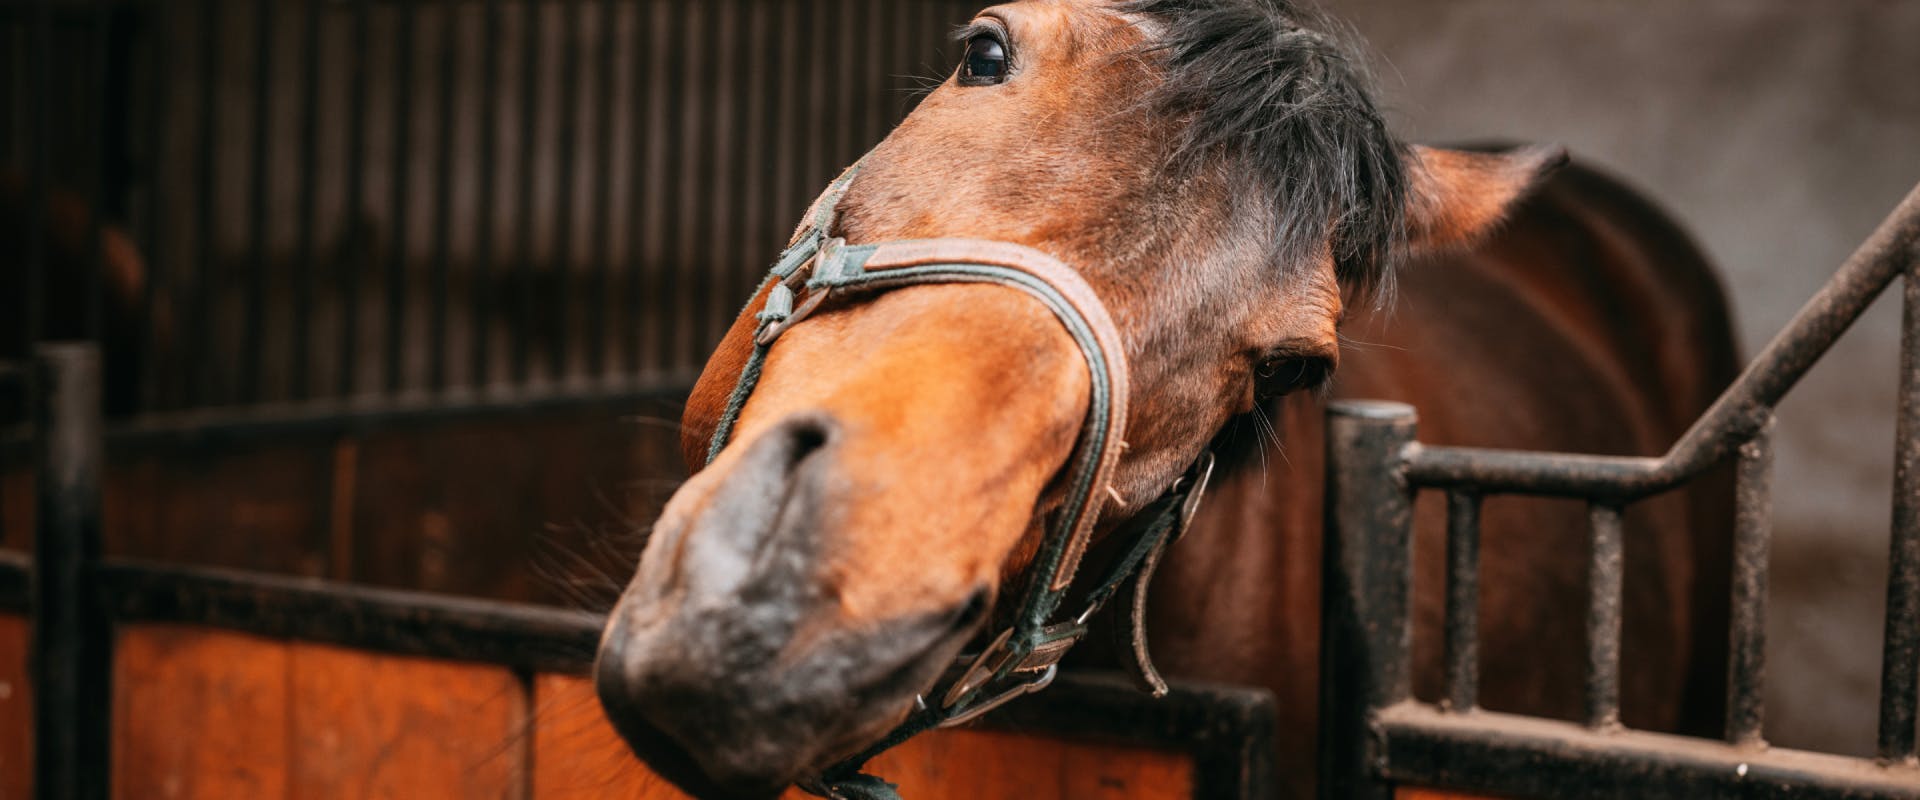 a brown horse looking at the camera with its head titled over a stable door